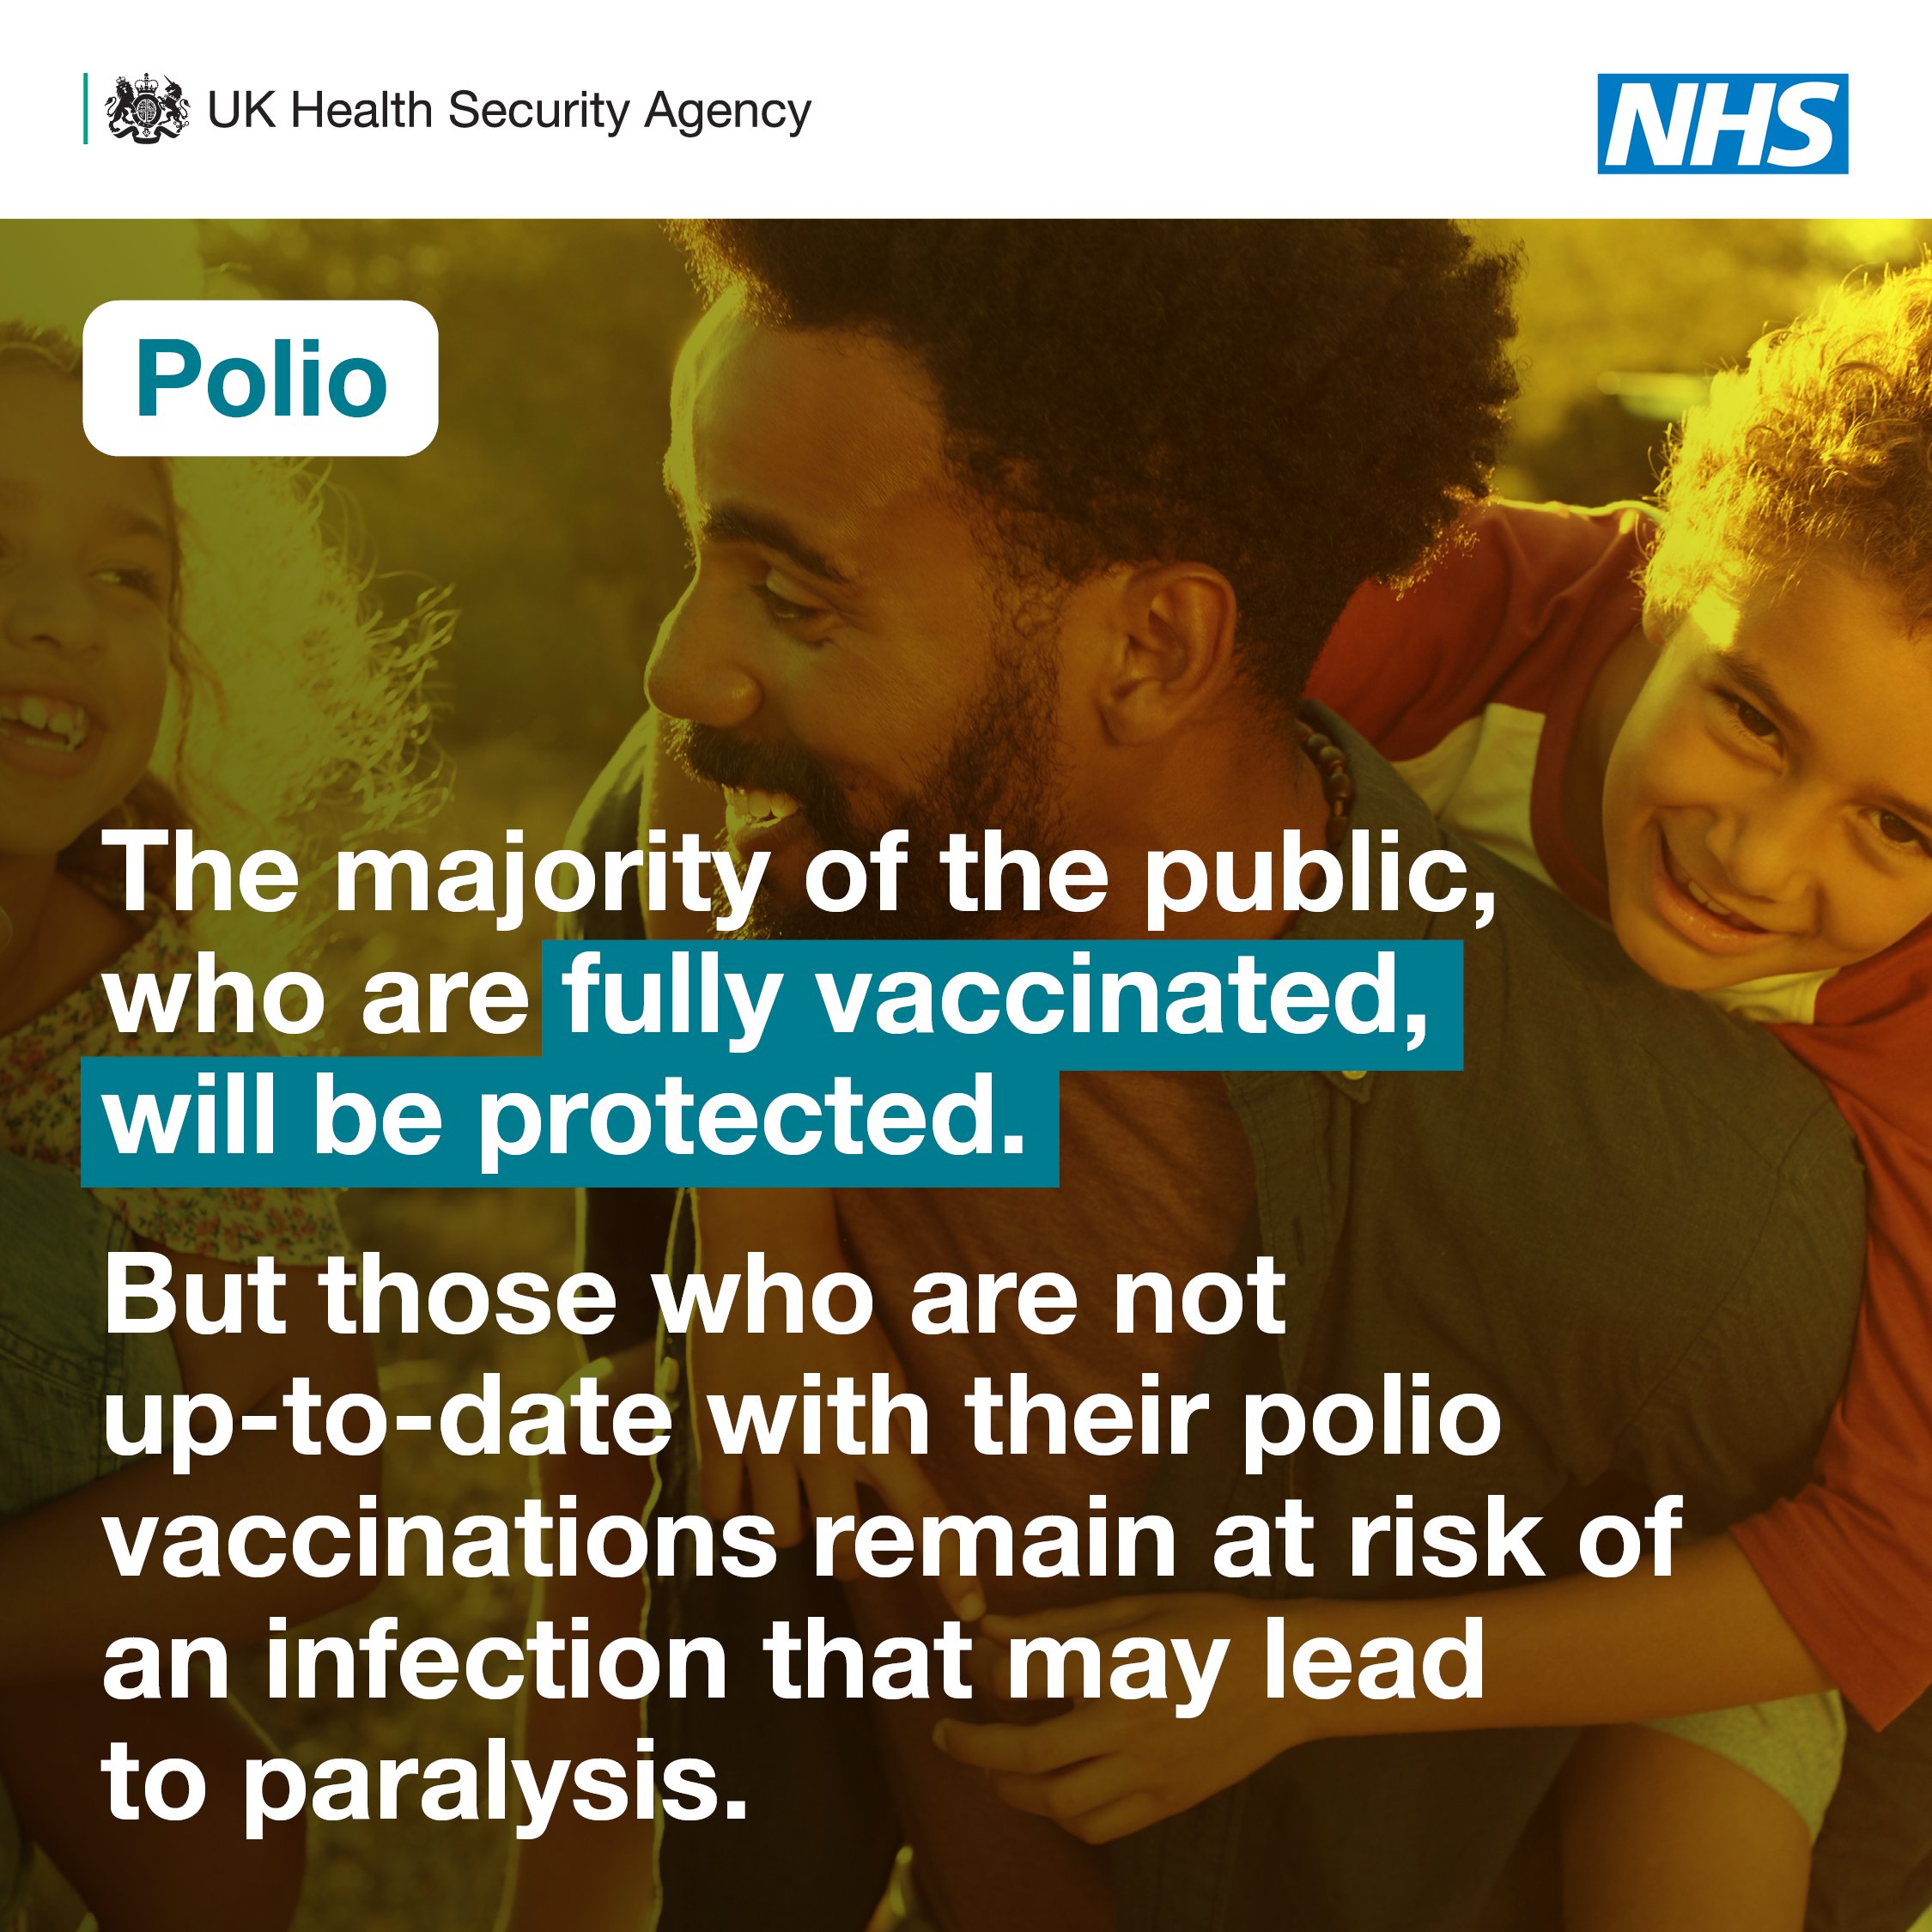 Image of a dad with two children. Text reads: The majority of the public who are fully vaccinated, will be protected. But those who are not up-to-date with their polio vaccinations remain at risk of an infection that may lead to paralysis.